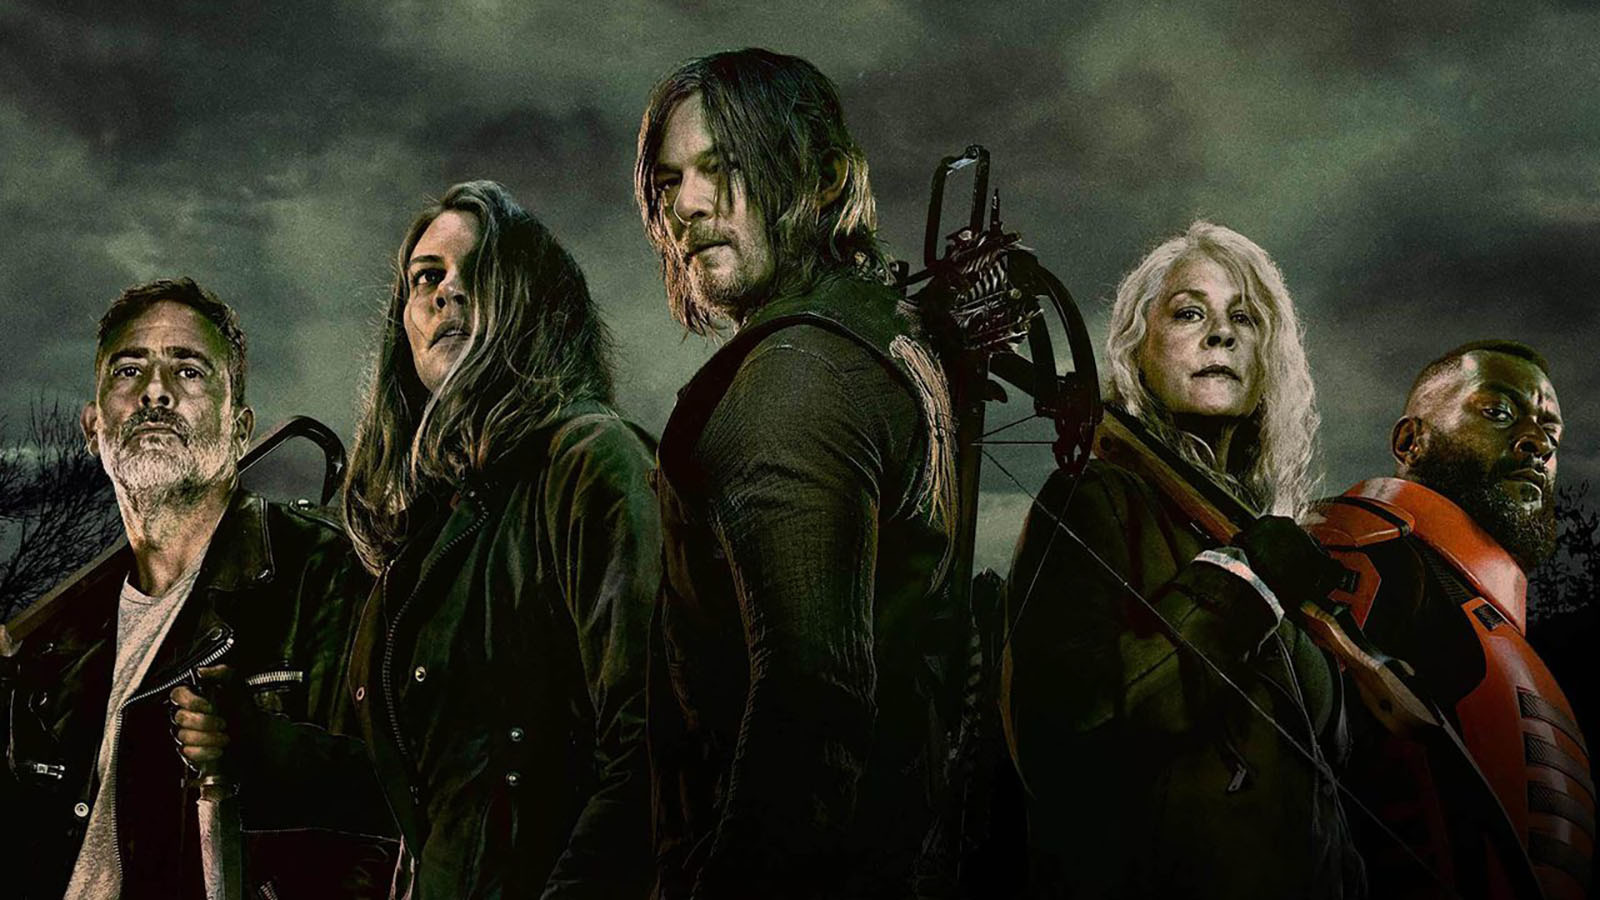 #The Walking Dead Series Finale Will Be Directed By Greg Nicotero